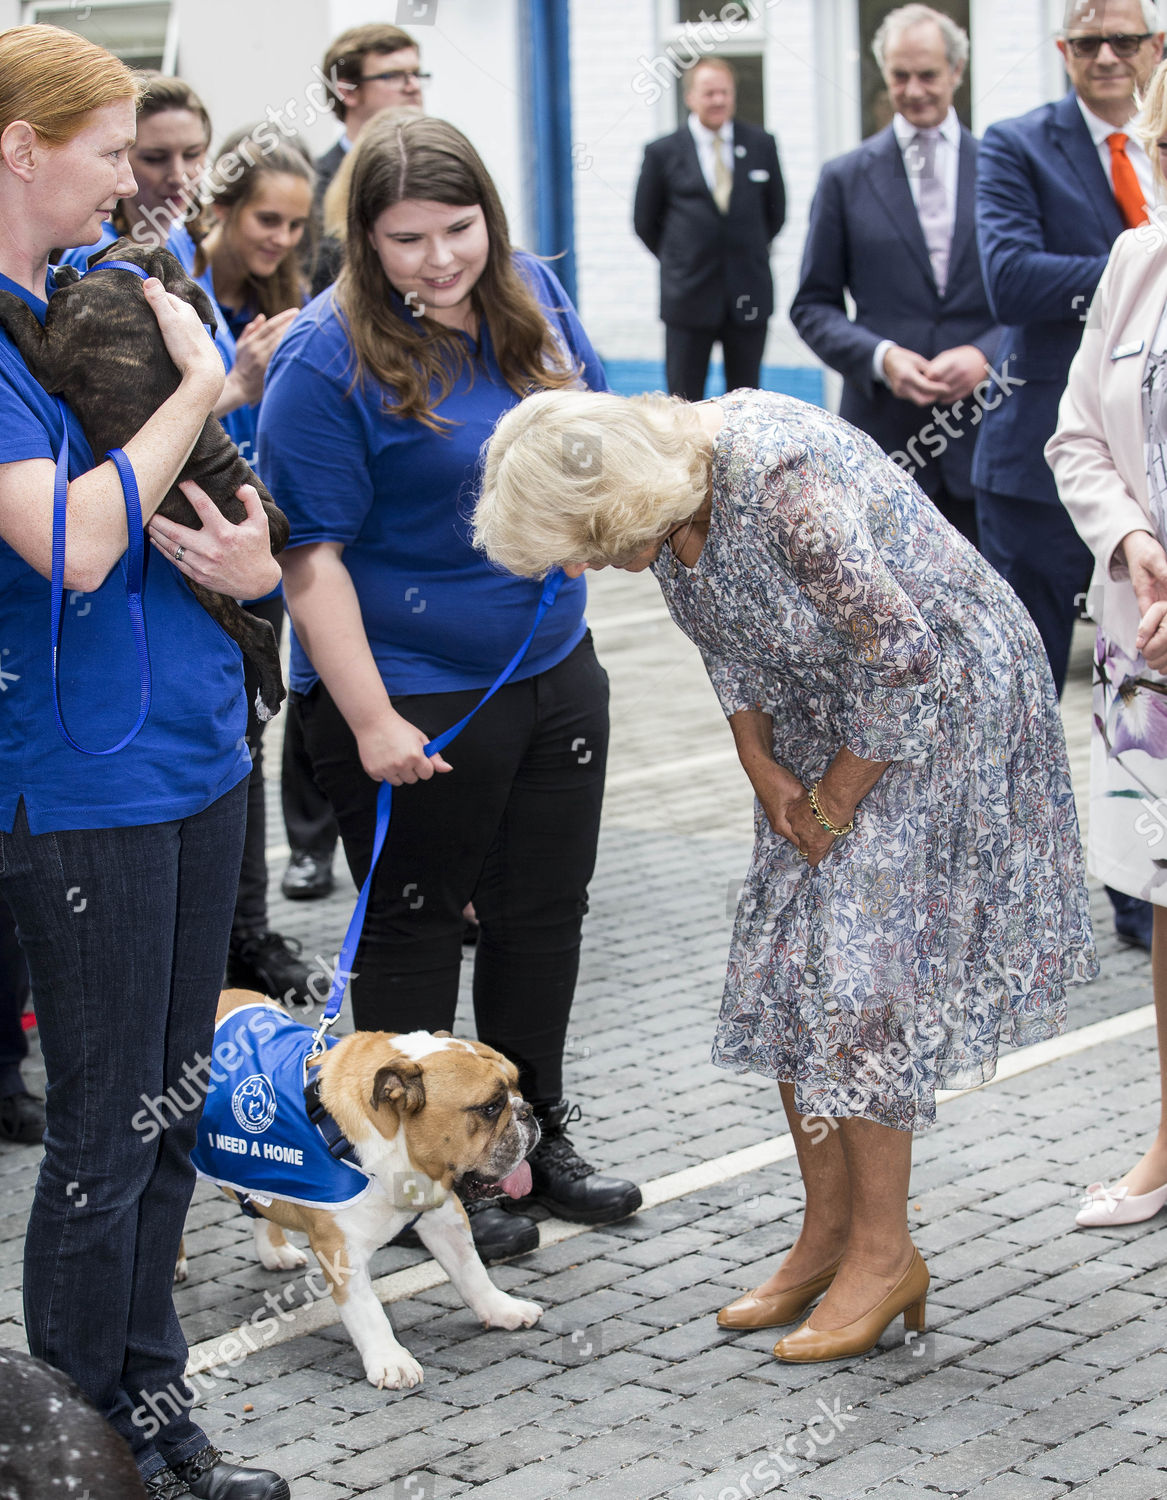 camilla-duchess-of-cornwall-visits-battersea-dogs-and-cats-home-london-uk-shutterstock-editorial-5893655d.jpg